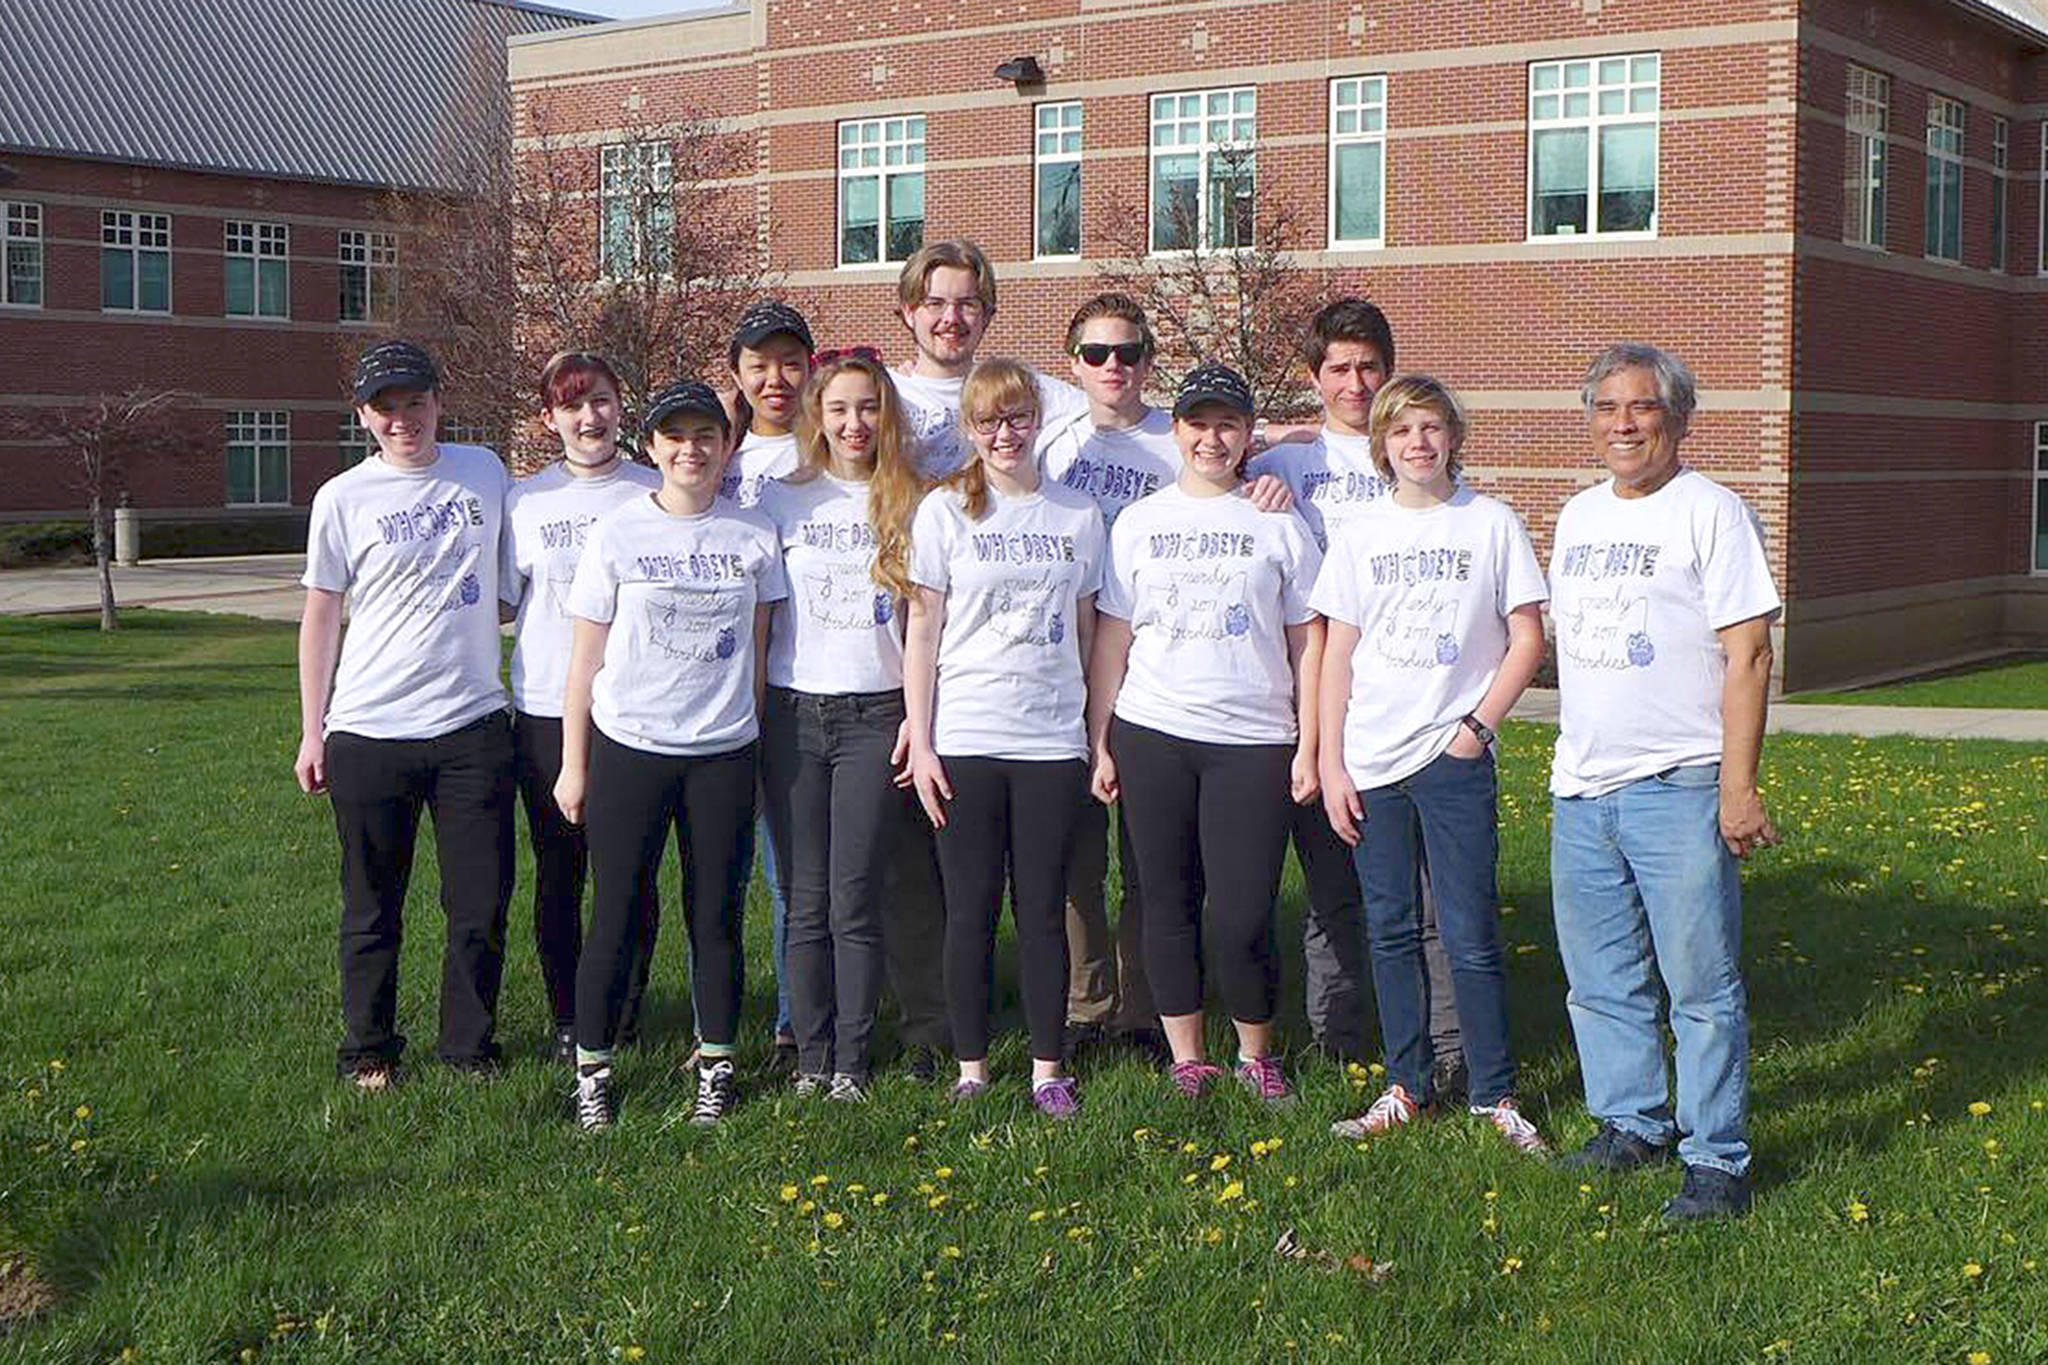 Nerdy Birdies place well at state math competition